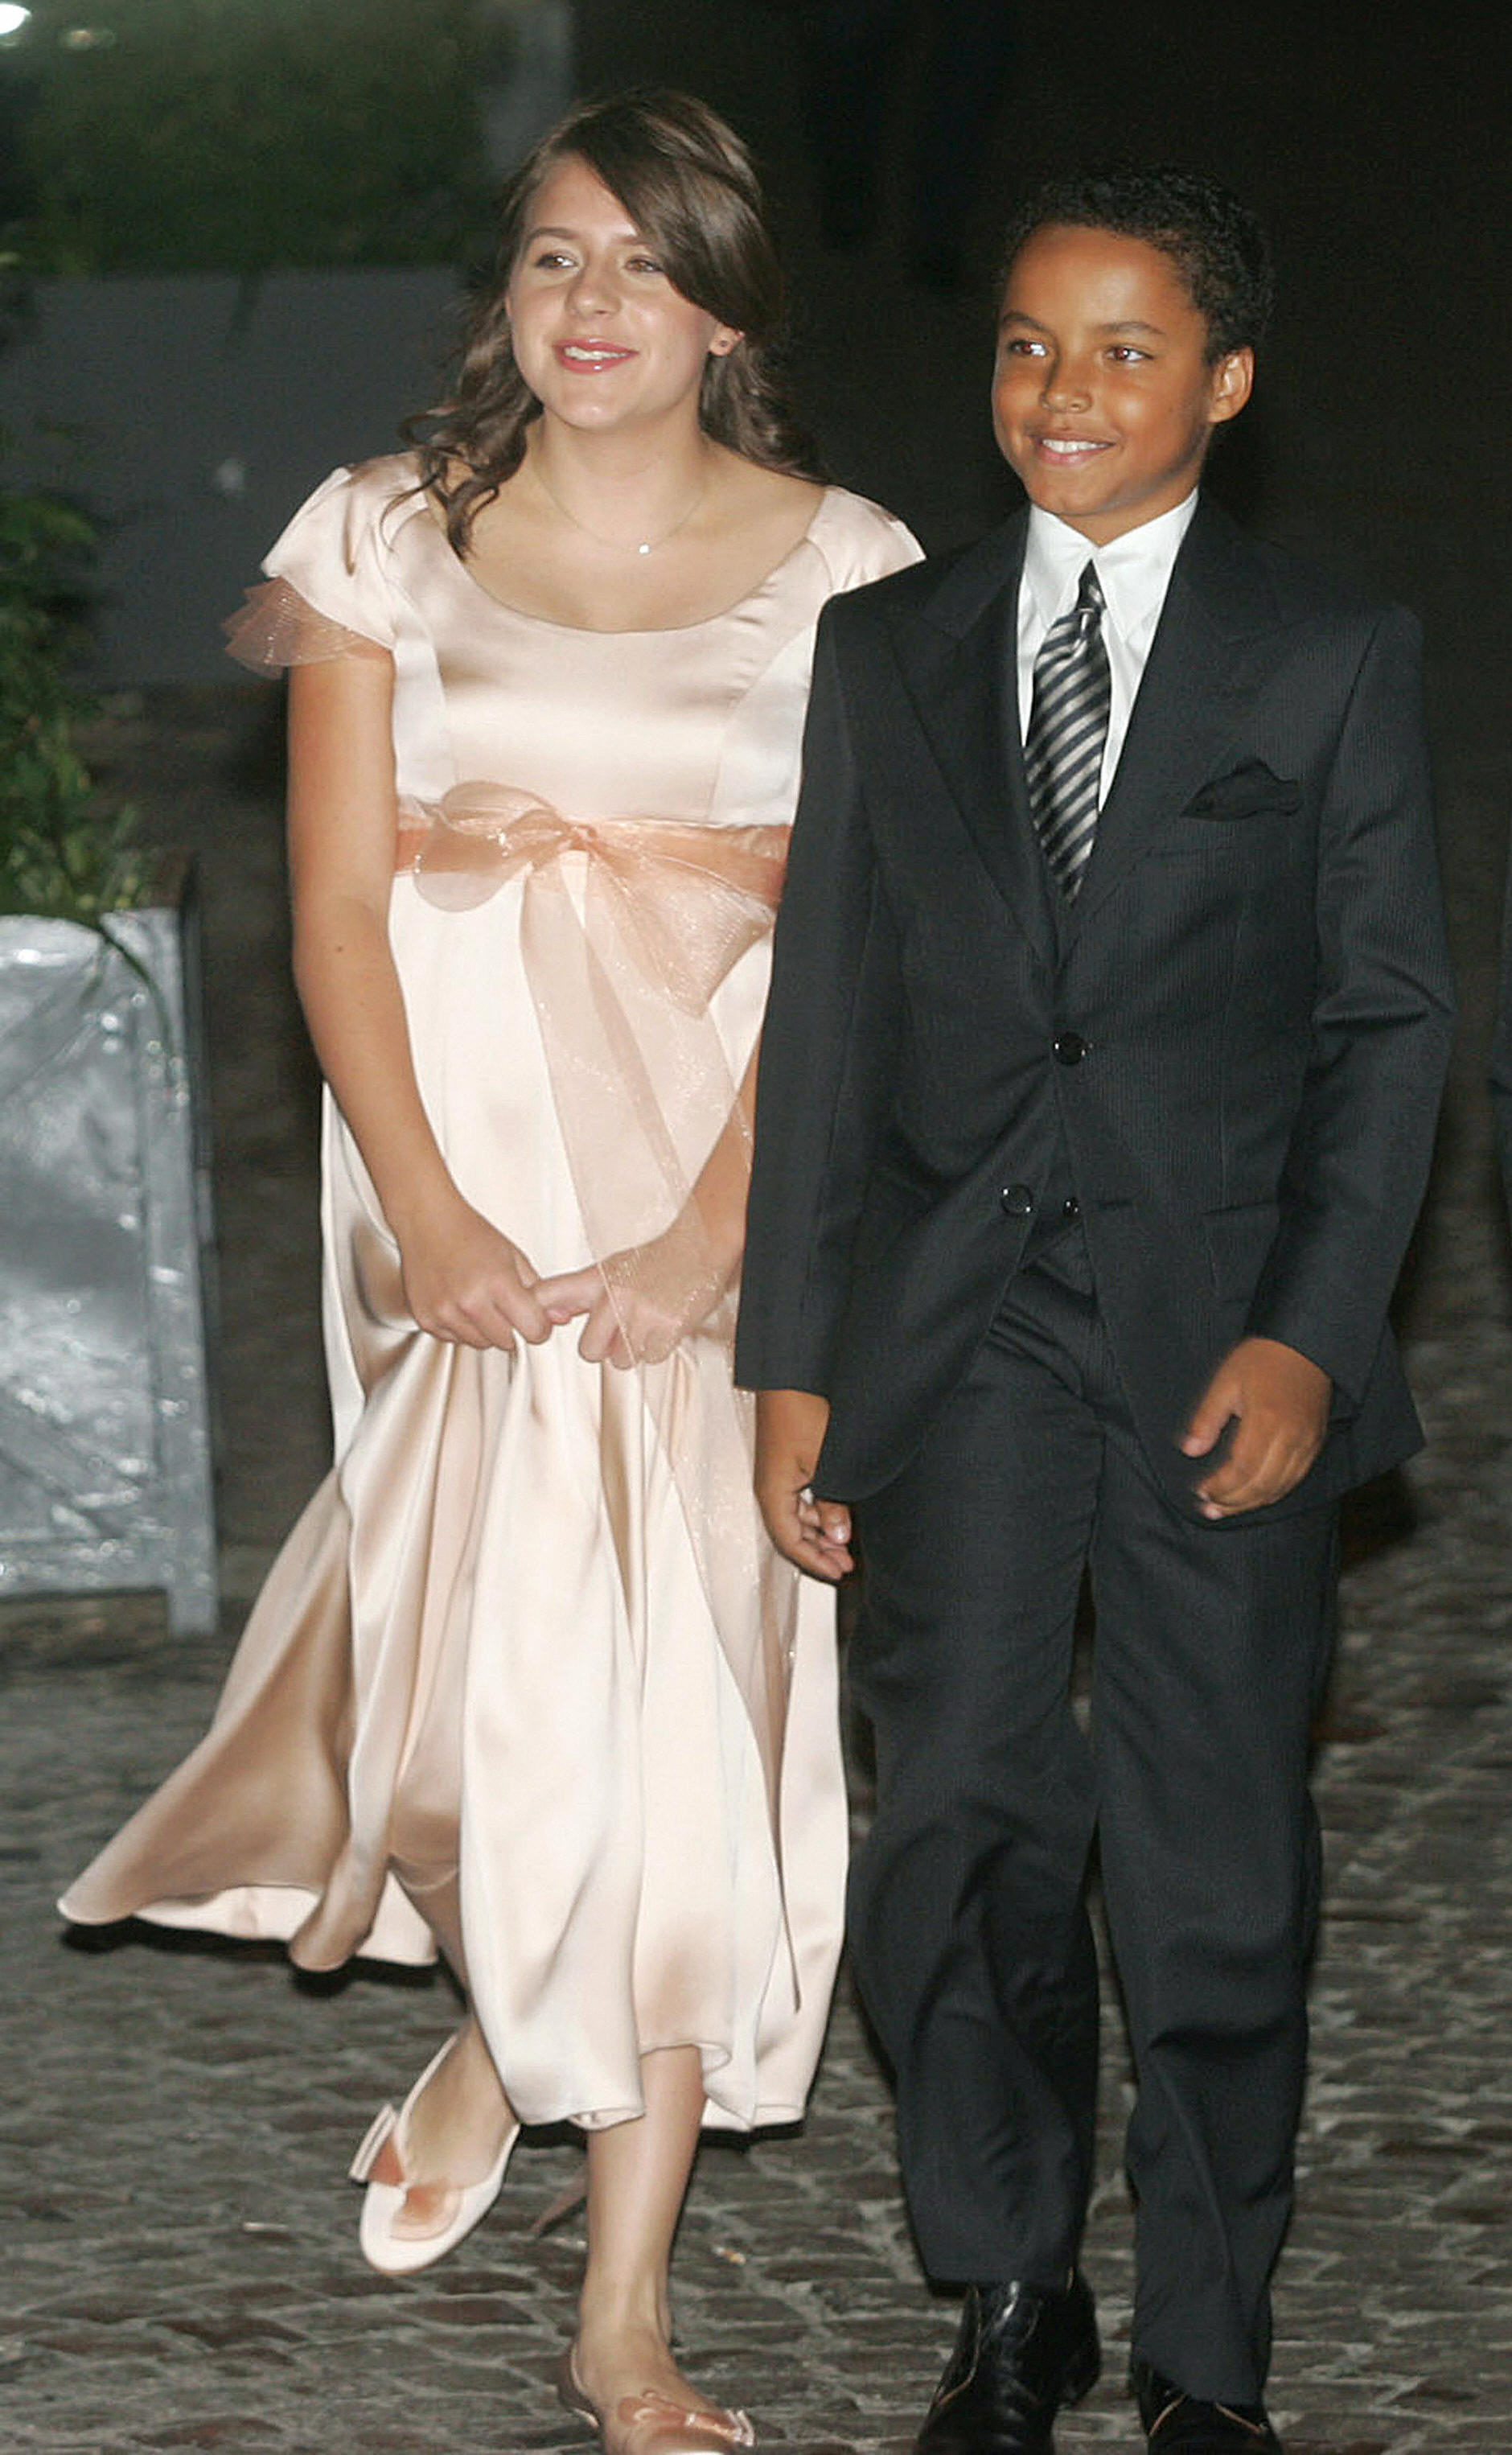 Isabella and Connor Cruise in Rome in 2006 | Source: Getty Images